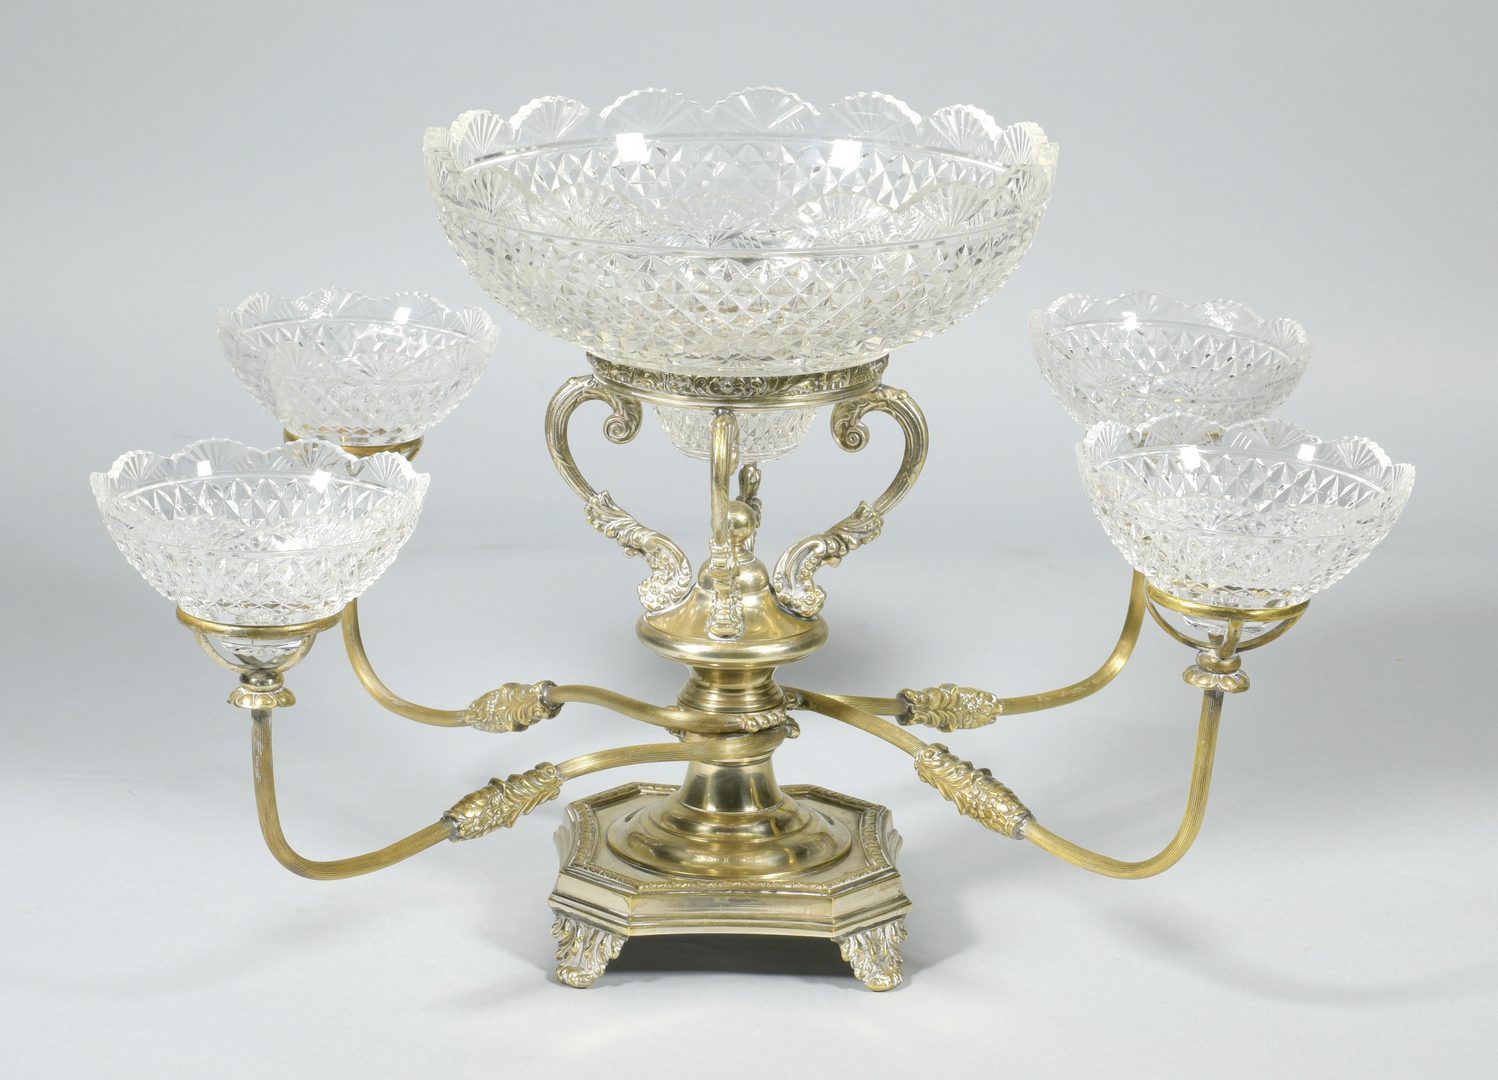 Lot 899: Sheffield Silverplated Candelabra and Epergne with 5 Glass Bowls